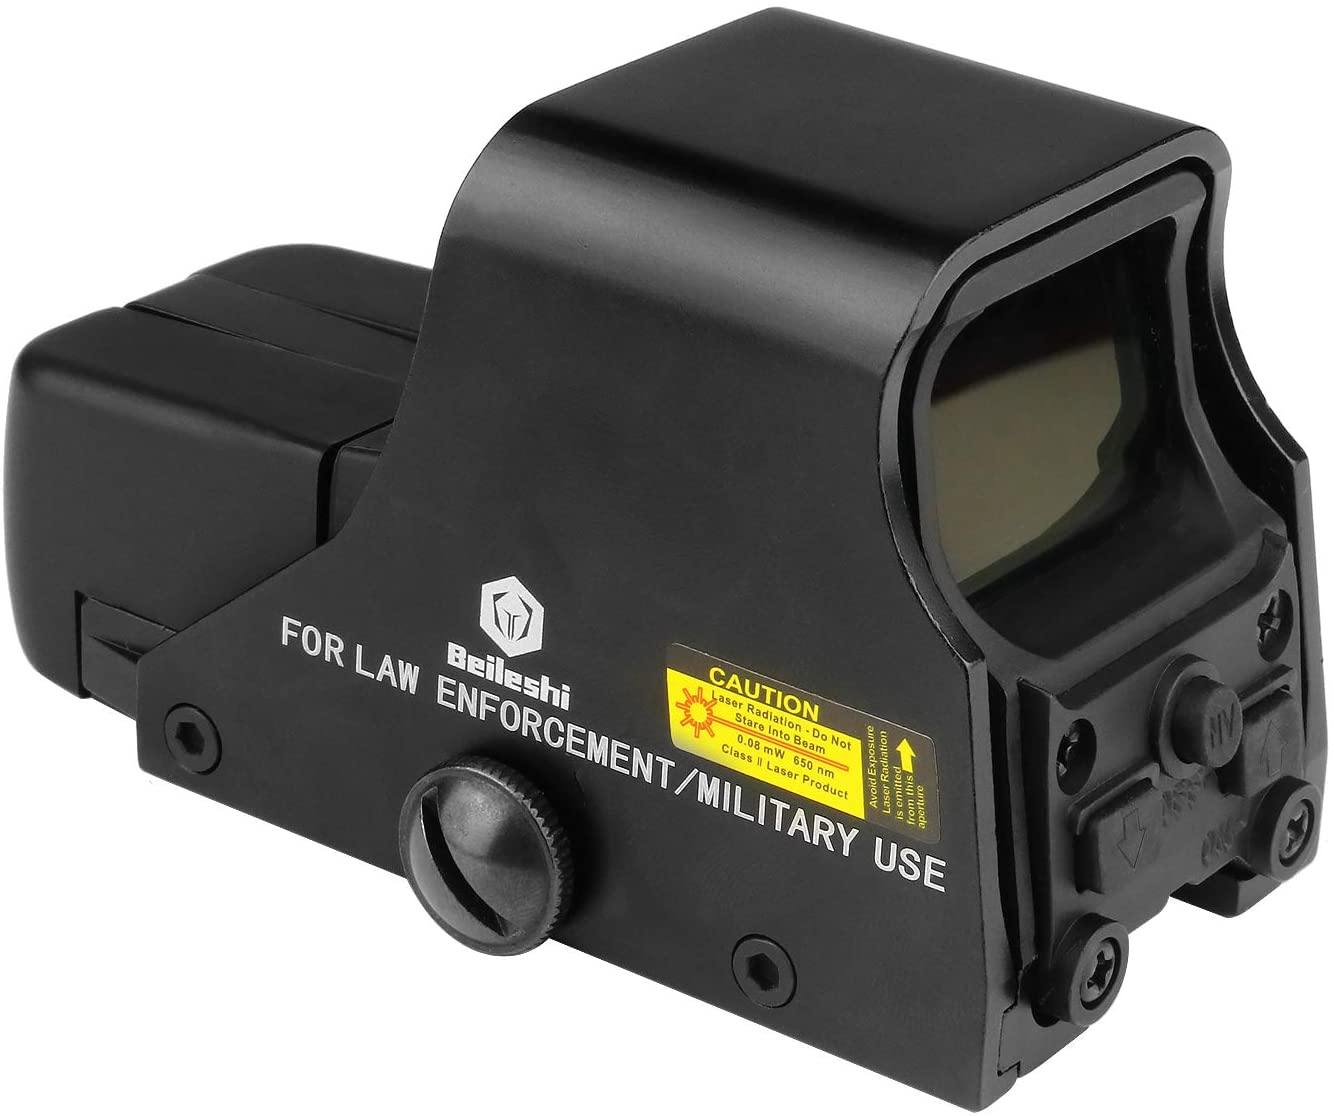 Beileshi 551 Holographic Sight Red Green Point - Security and More